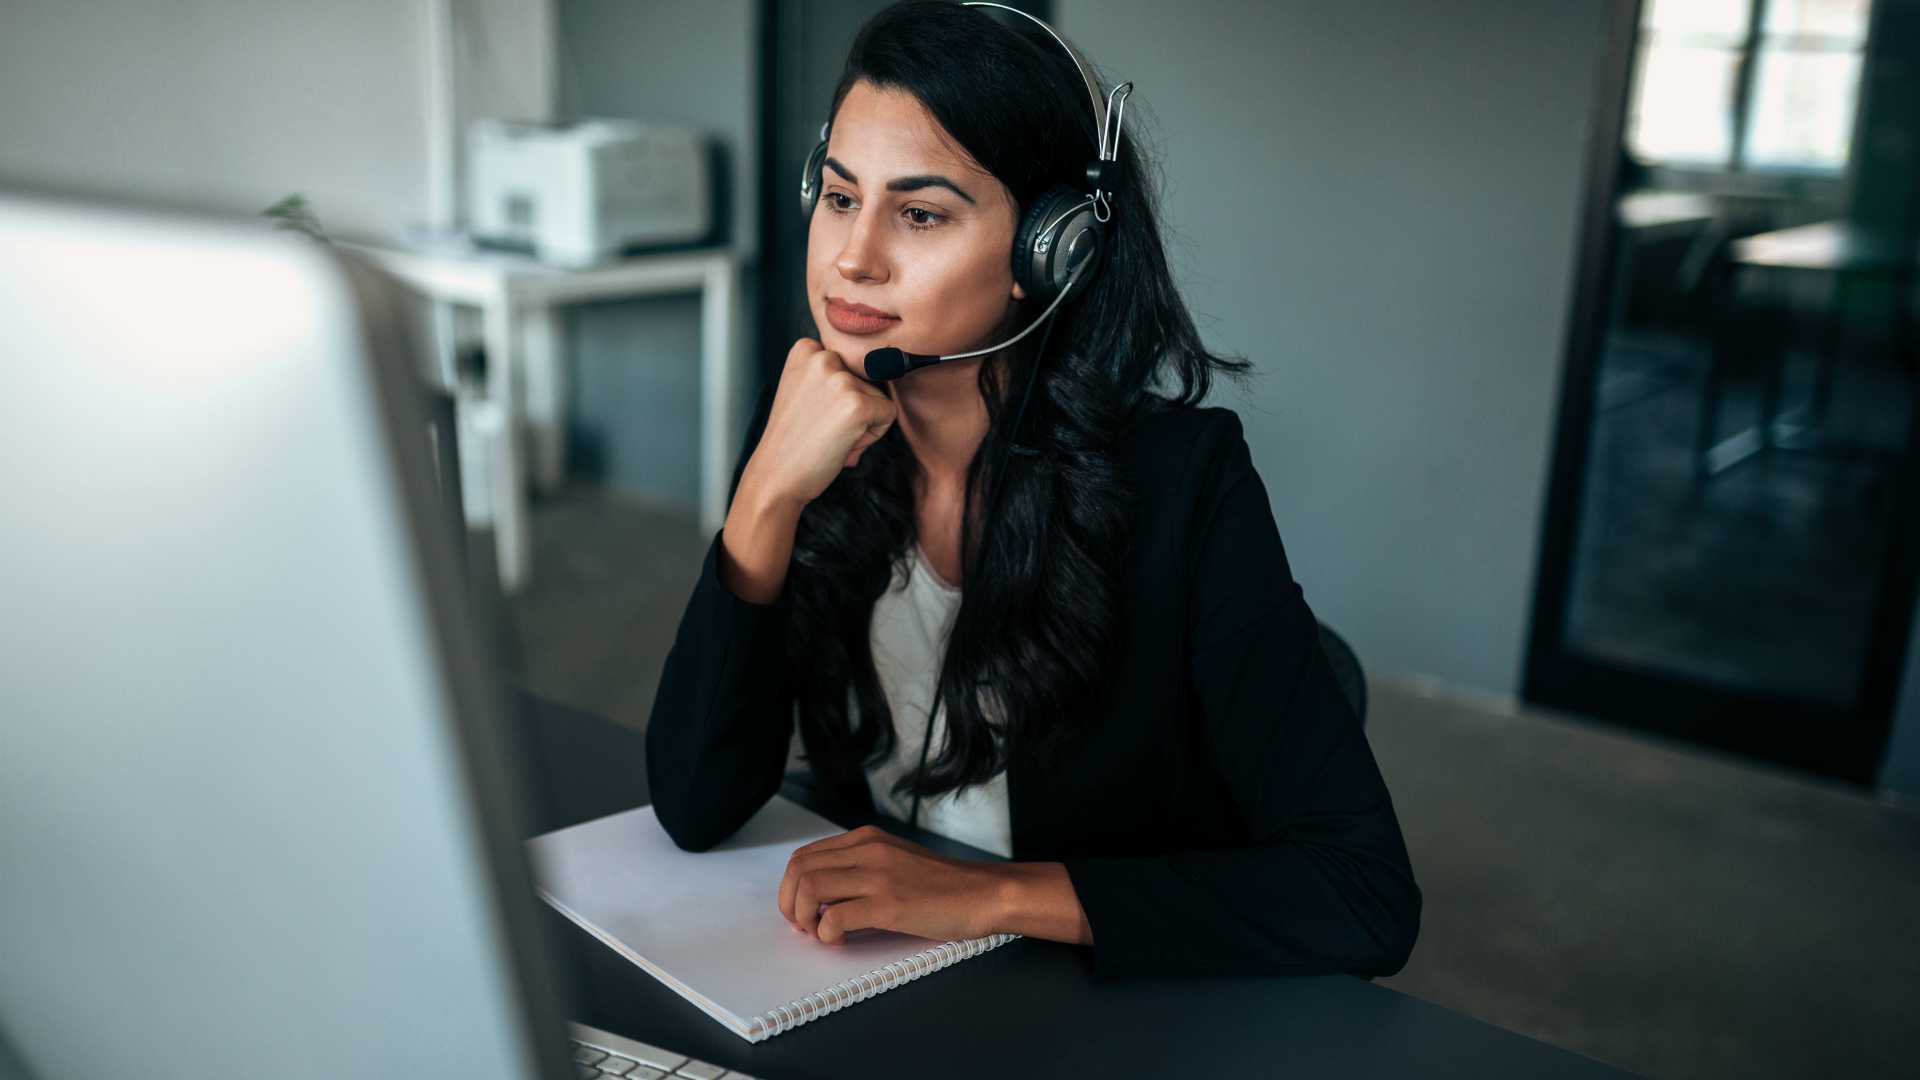 Pensive businesswoman with headset looking at computer screen.